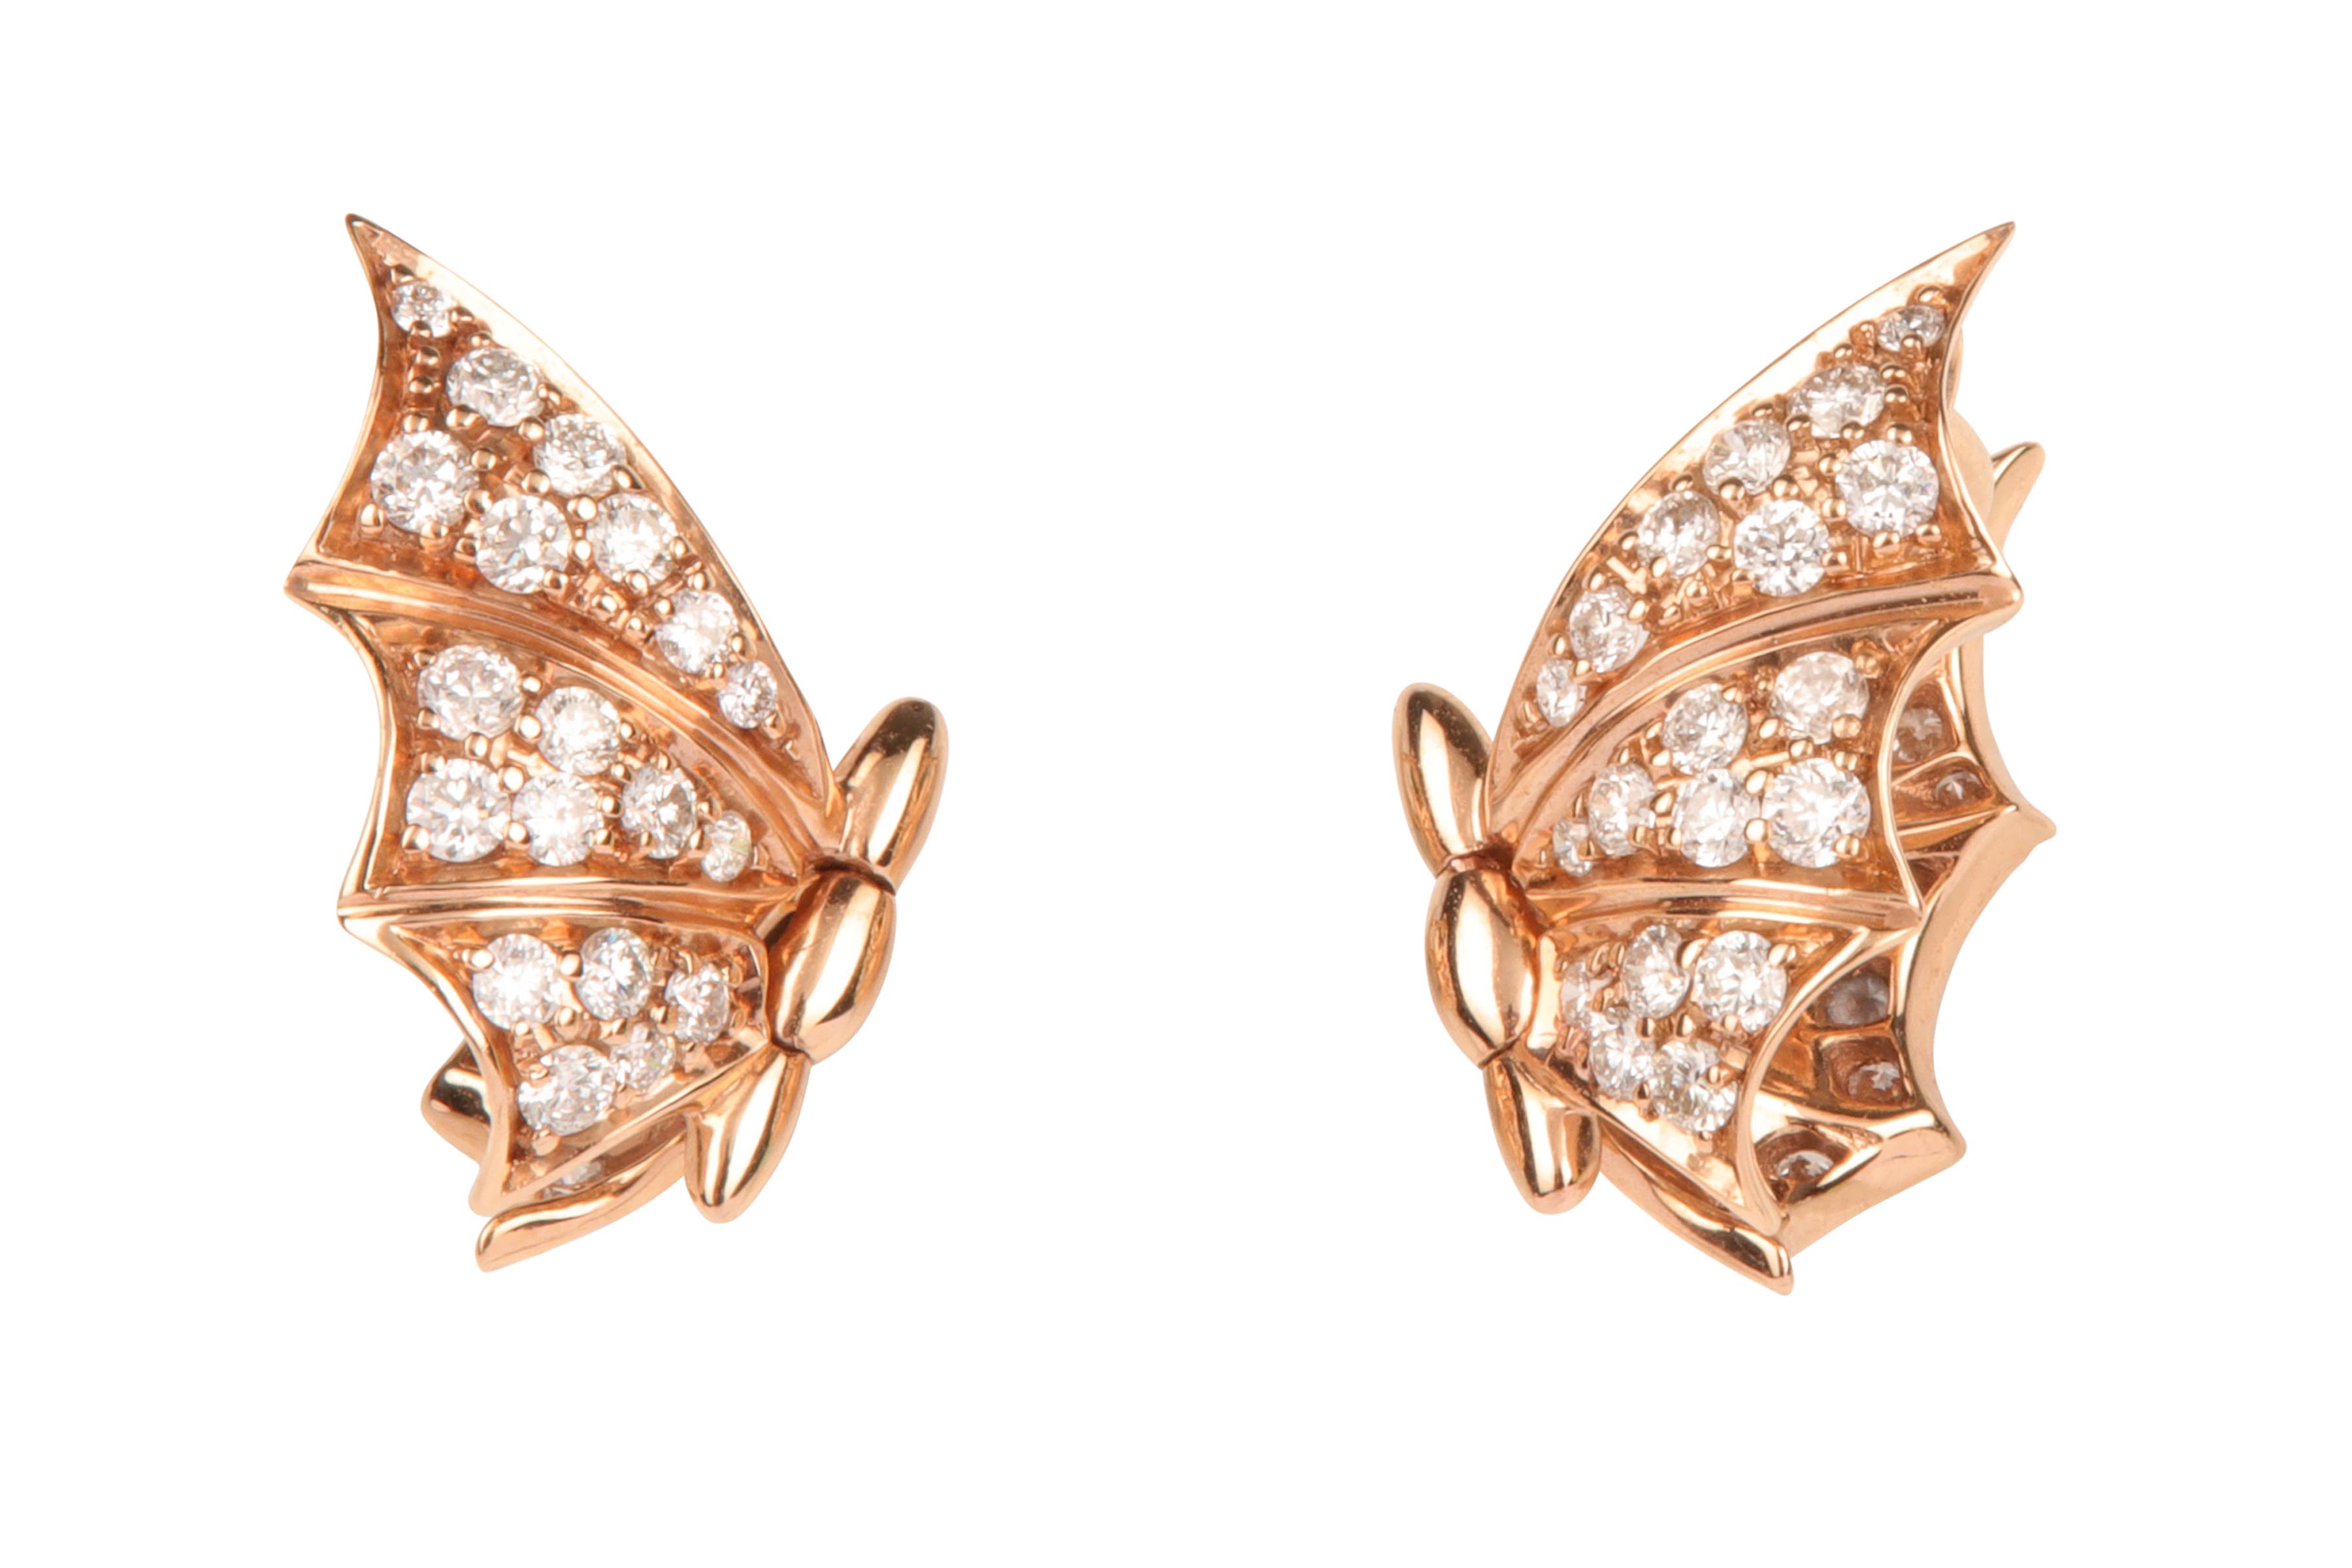 A pair of diamond 'Fly by Night' earrings, by Stephen Webster - Image 2 of 3